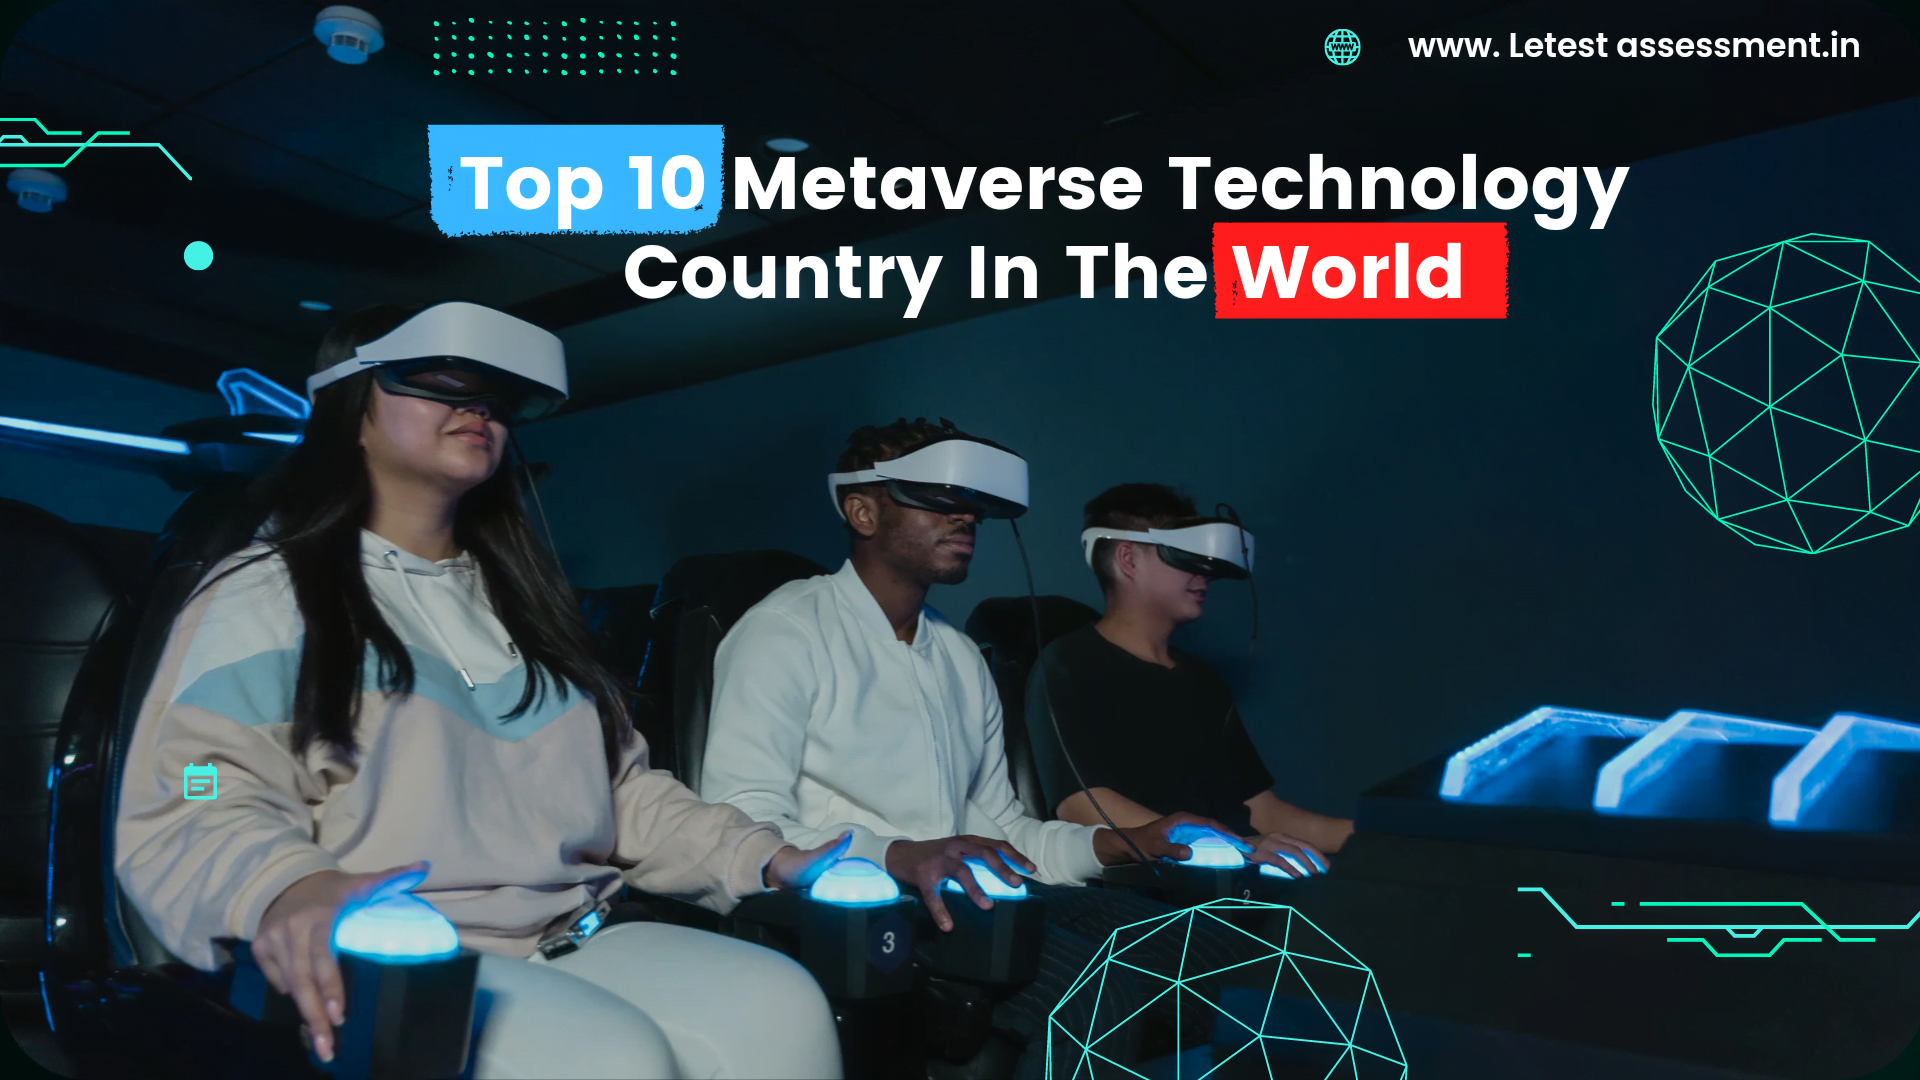 Top 10 Metaverse Technology Country In The World